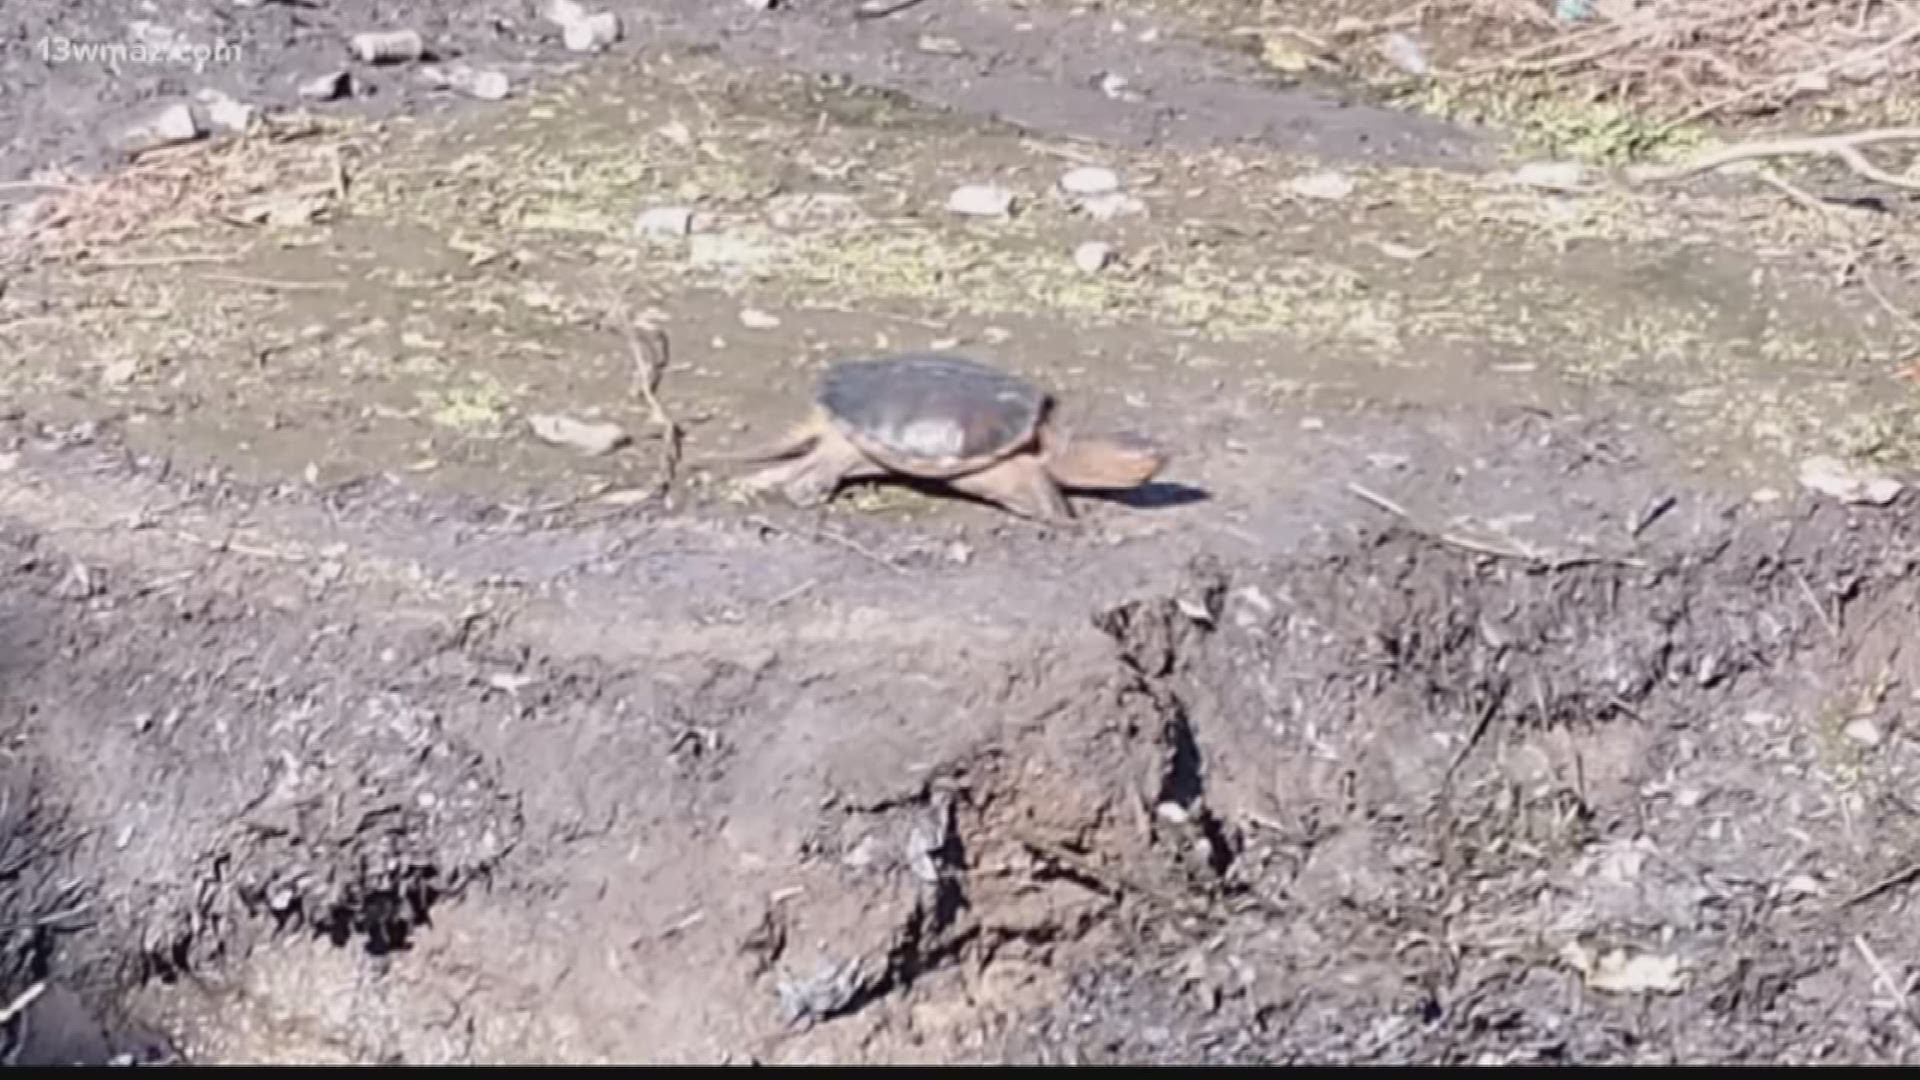 Macon-Bibb County construction workers are working on fixing drainage issues off Roff Avenue, but one property owner is worried about the turtle living in the creek near the construction.